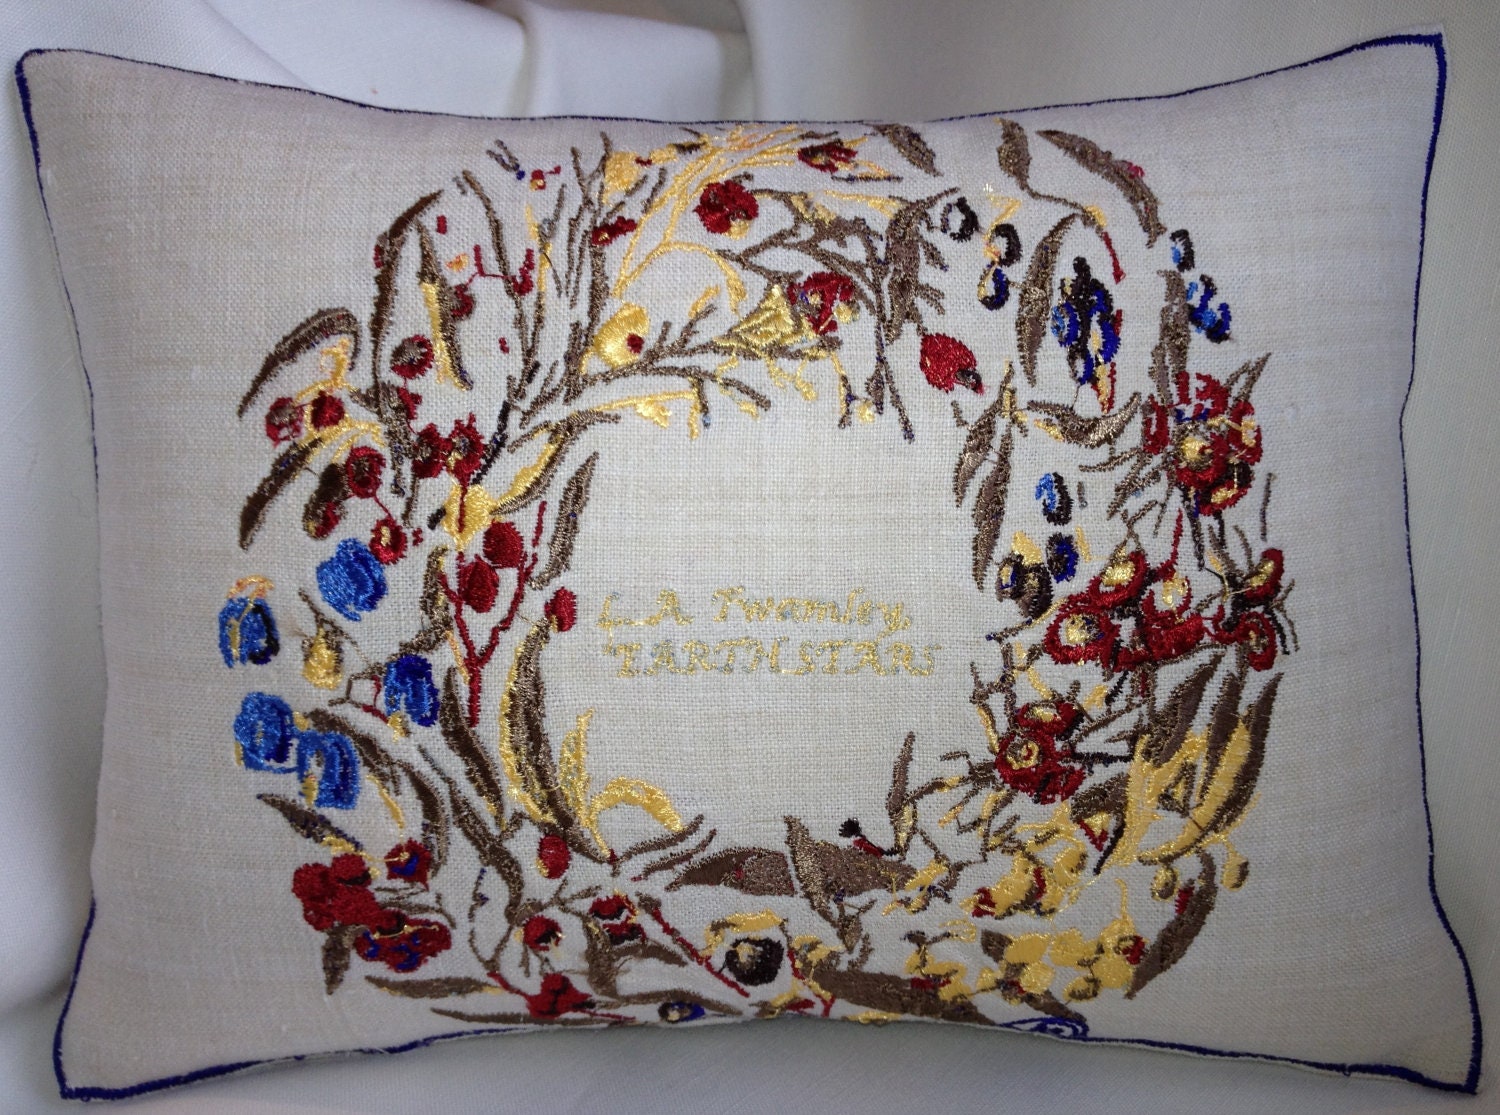 Artistic Embroidery Berry Ring, "Earth Stars" Cushion Throw - Vintage Linen